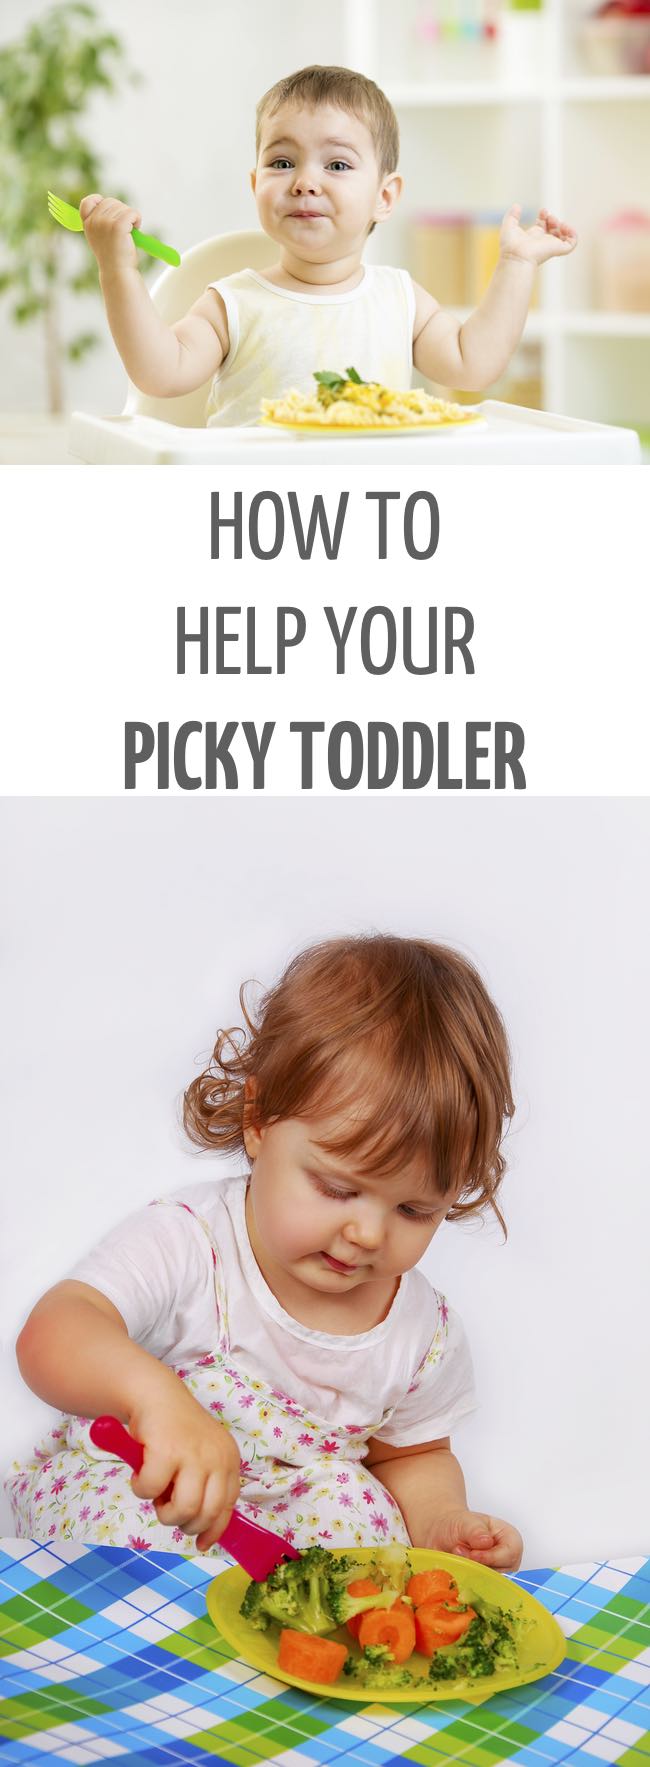 How to Help Your Fussy Eater. Feeding a picky toddler or fussy eater can be stressful and frustrating, epecially if you want to teach them healthy eating habits. There is one golden rule to helping your fussy toddler learn healthy eating habits and start to love healthy foods. #toddler #fussyeater #fussytoddler #toddlerwon'teat #pickyeater #parenting #positiveparenting.